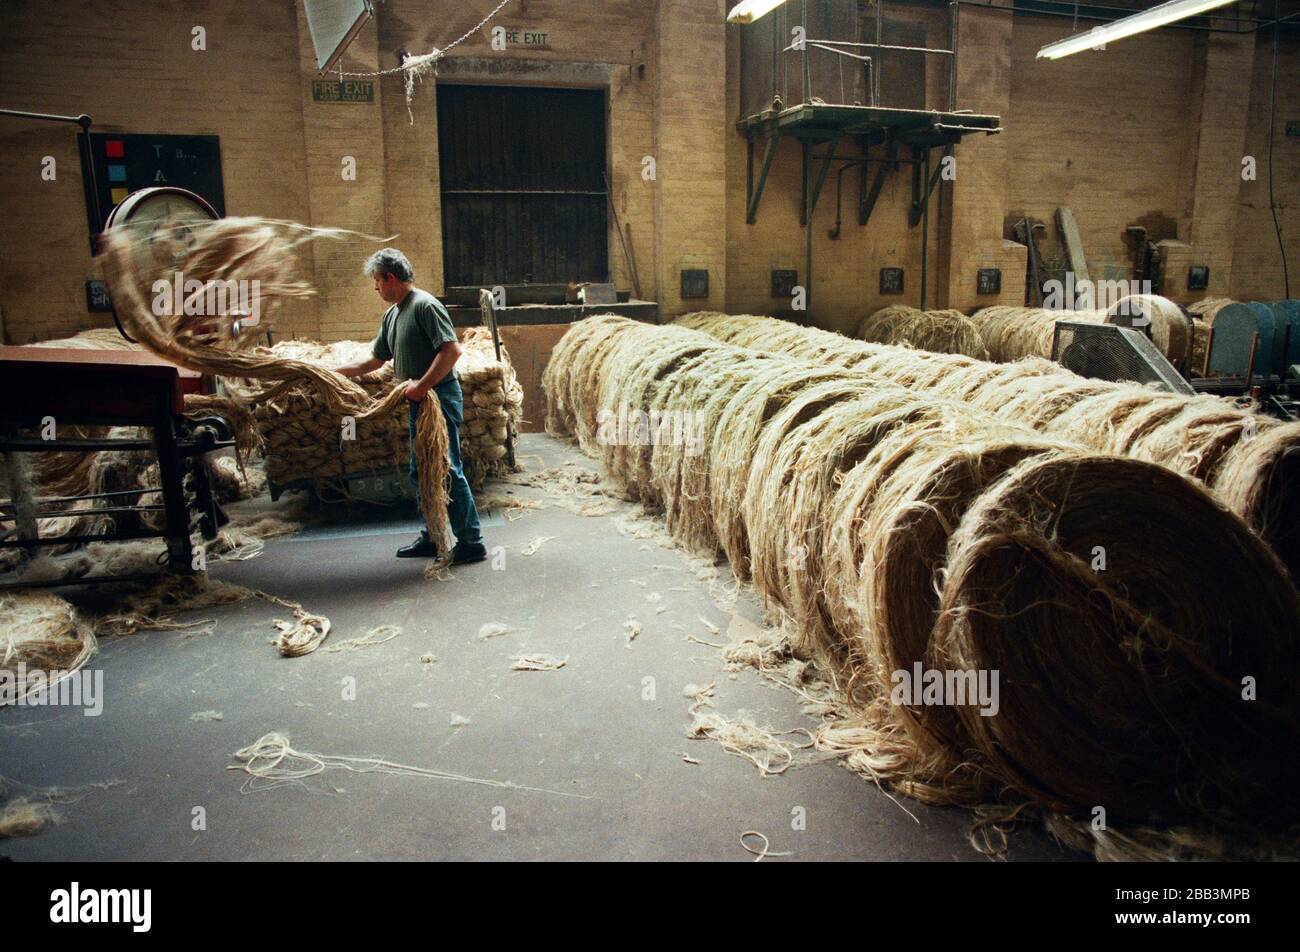 A worker feeding jute into a machine at Tay Spinners mill in Dundee, Scotland. This factory was the last jute spinning mill in Europe when it closed for the final time in 1998. The city of Dundee had been famous throughout history for the three 'Js' - jute, jam and journalism. Stock Photo